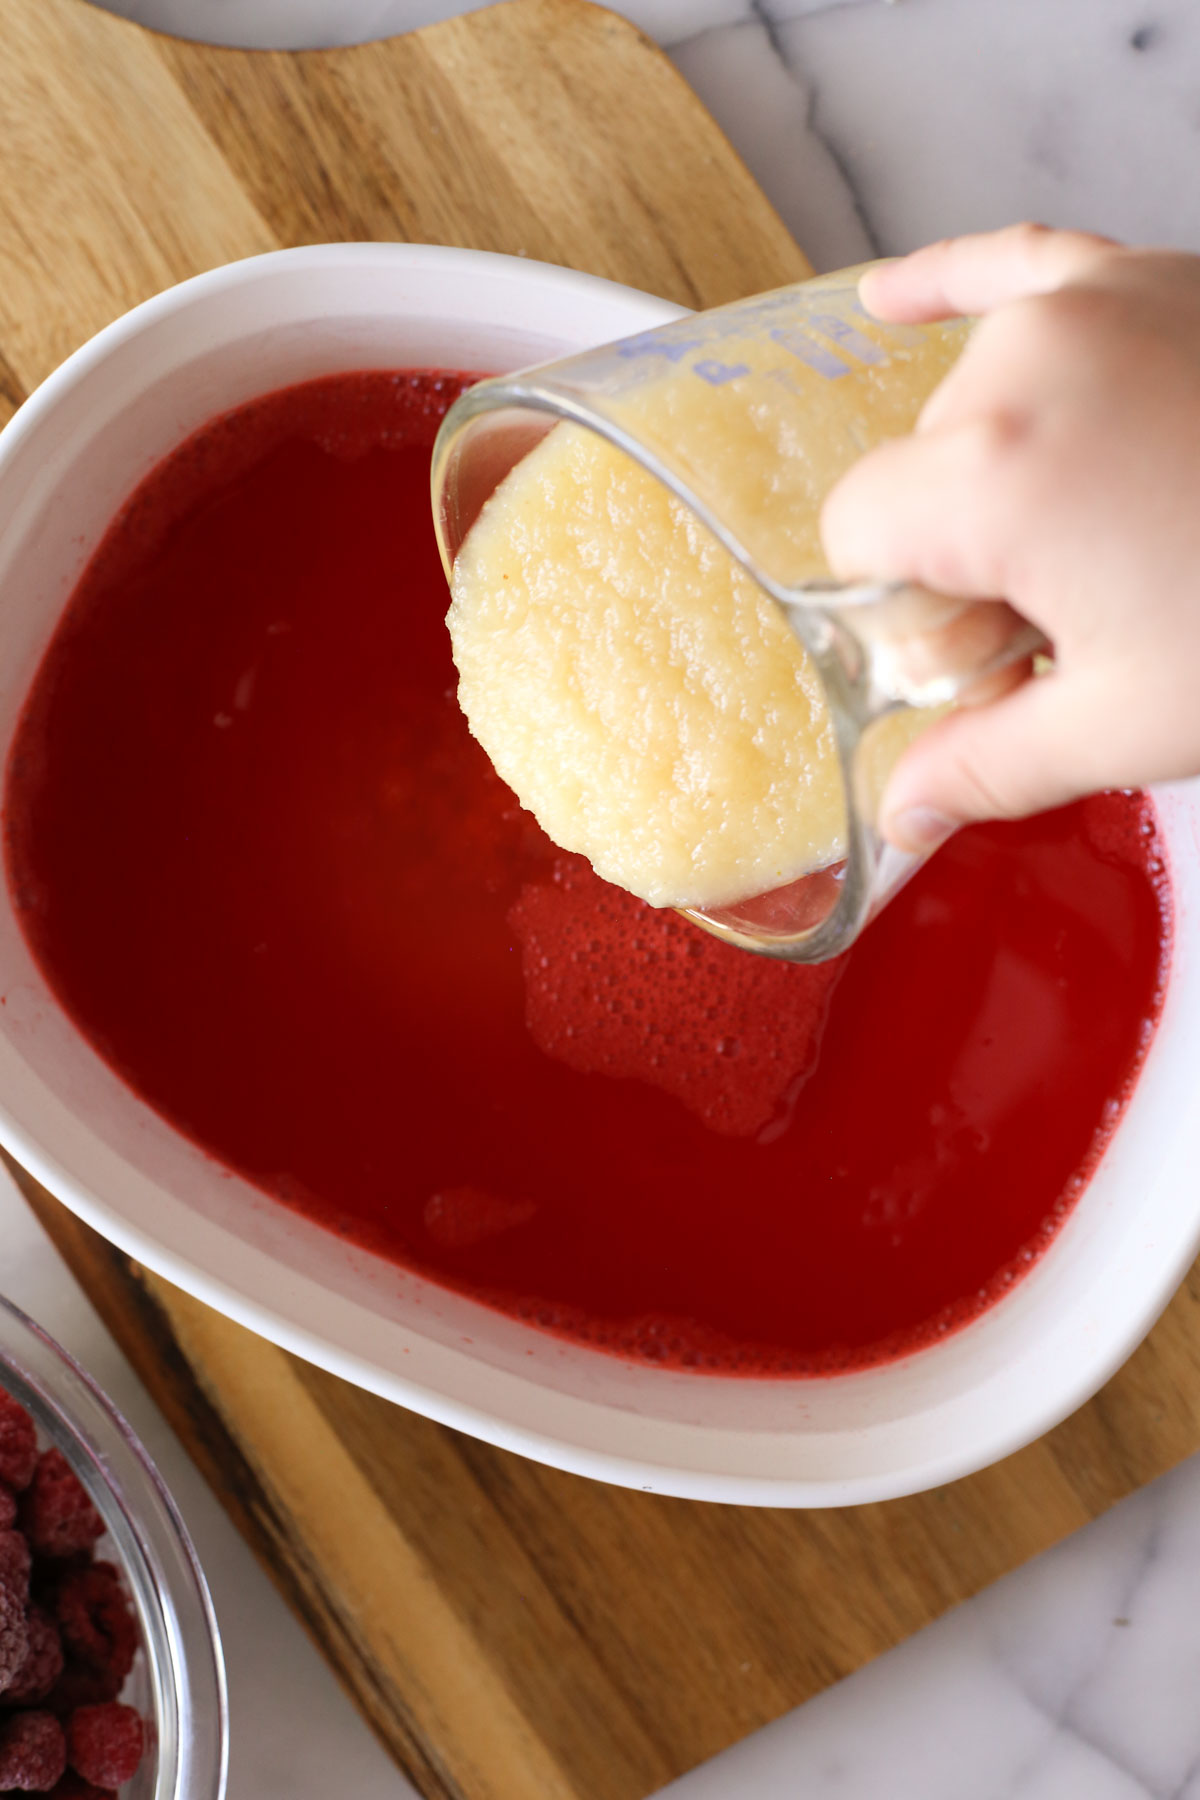 Overhead shot of a glass measuring cup of applesauce being poured into a baking dish of raspberry gelatin and boiling water.  